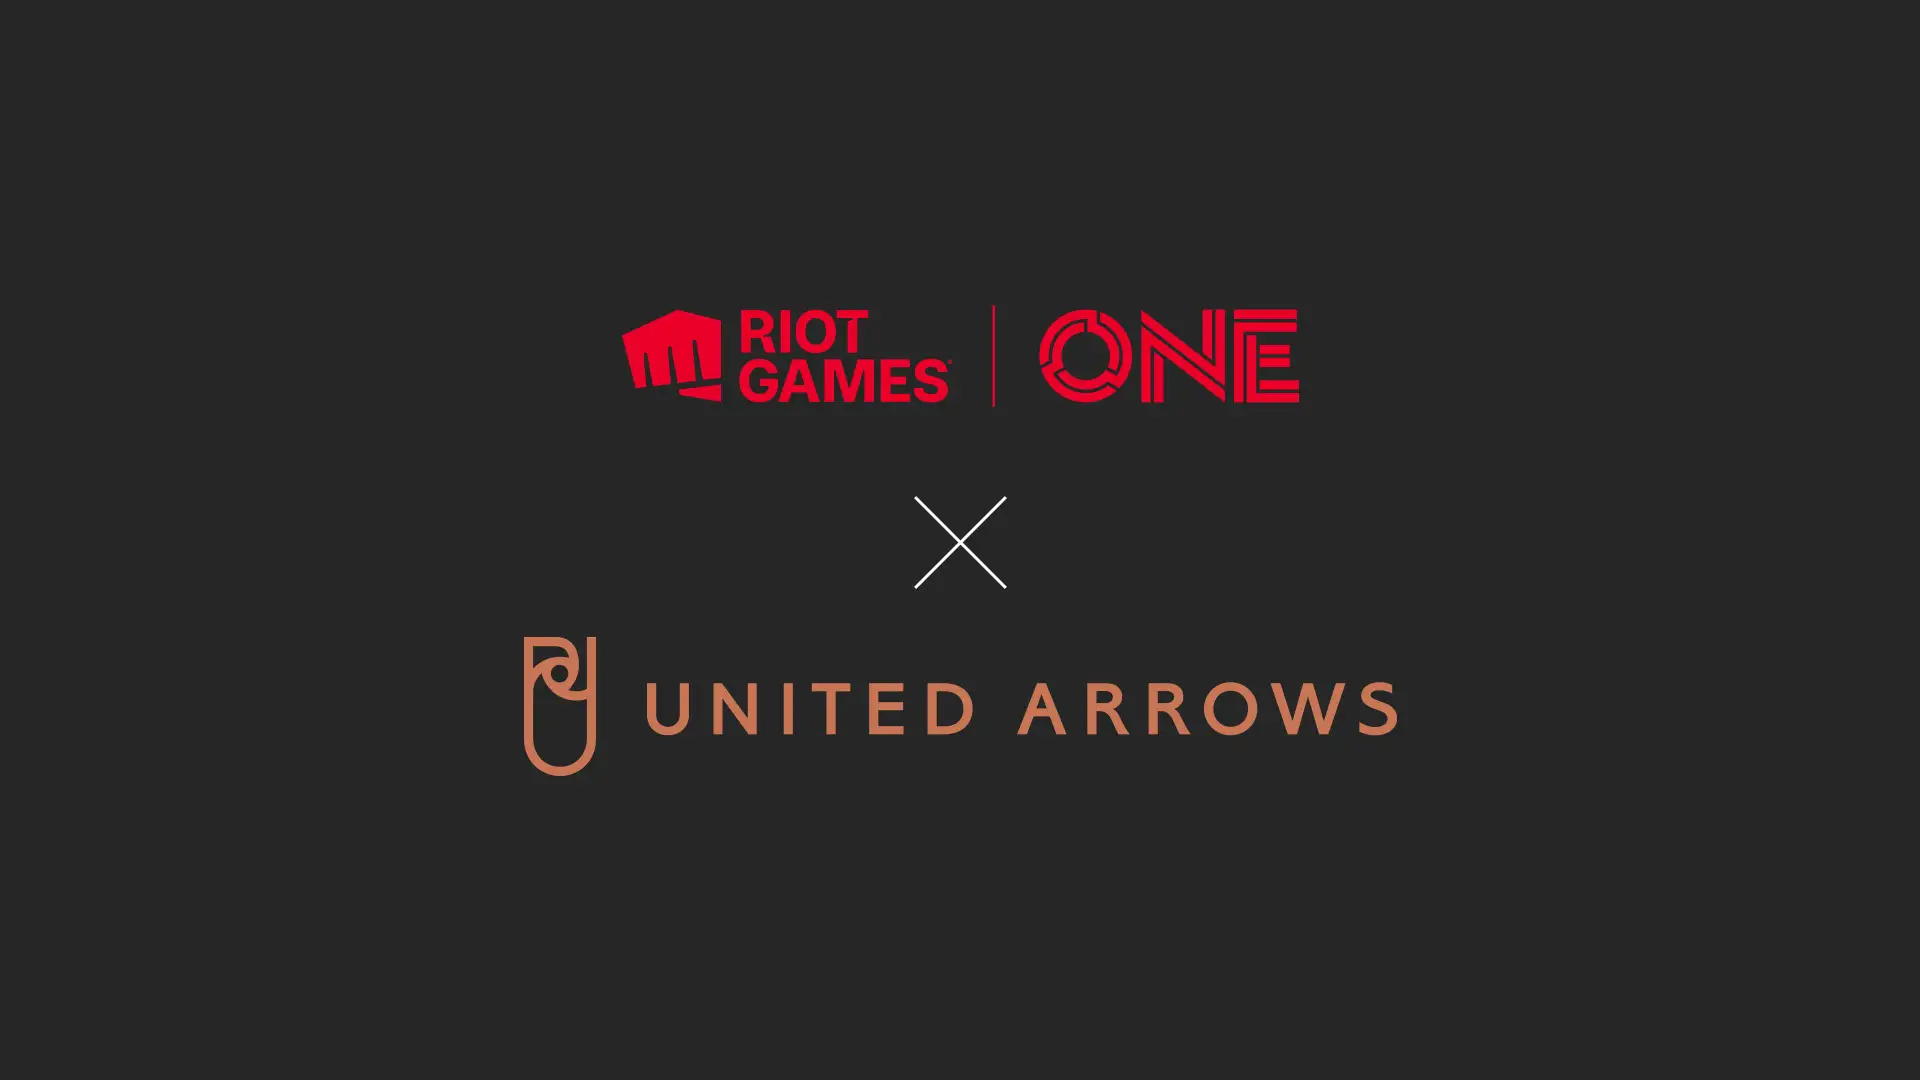 【News】Riot Games ONExUNITED ARROWSのコラボレーション